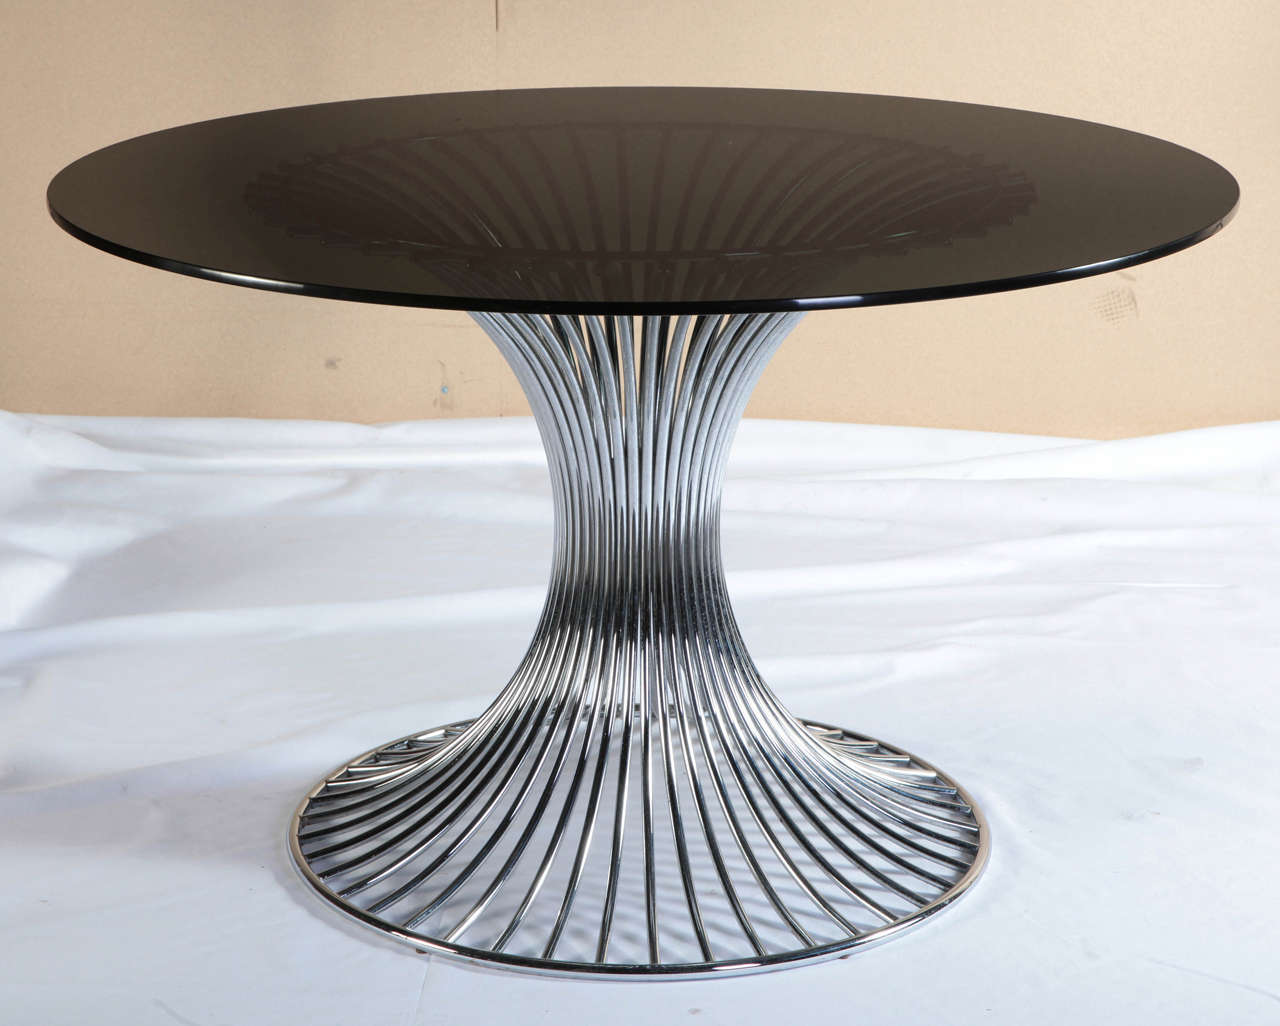 Table by Gastone Rinaldi with original black crystal, tubular and chromed structure .1970's.
Six chairs available.